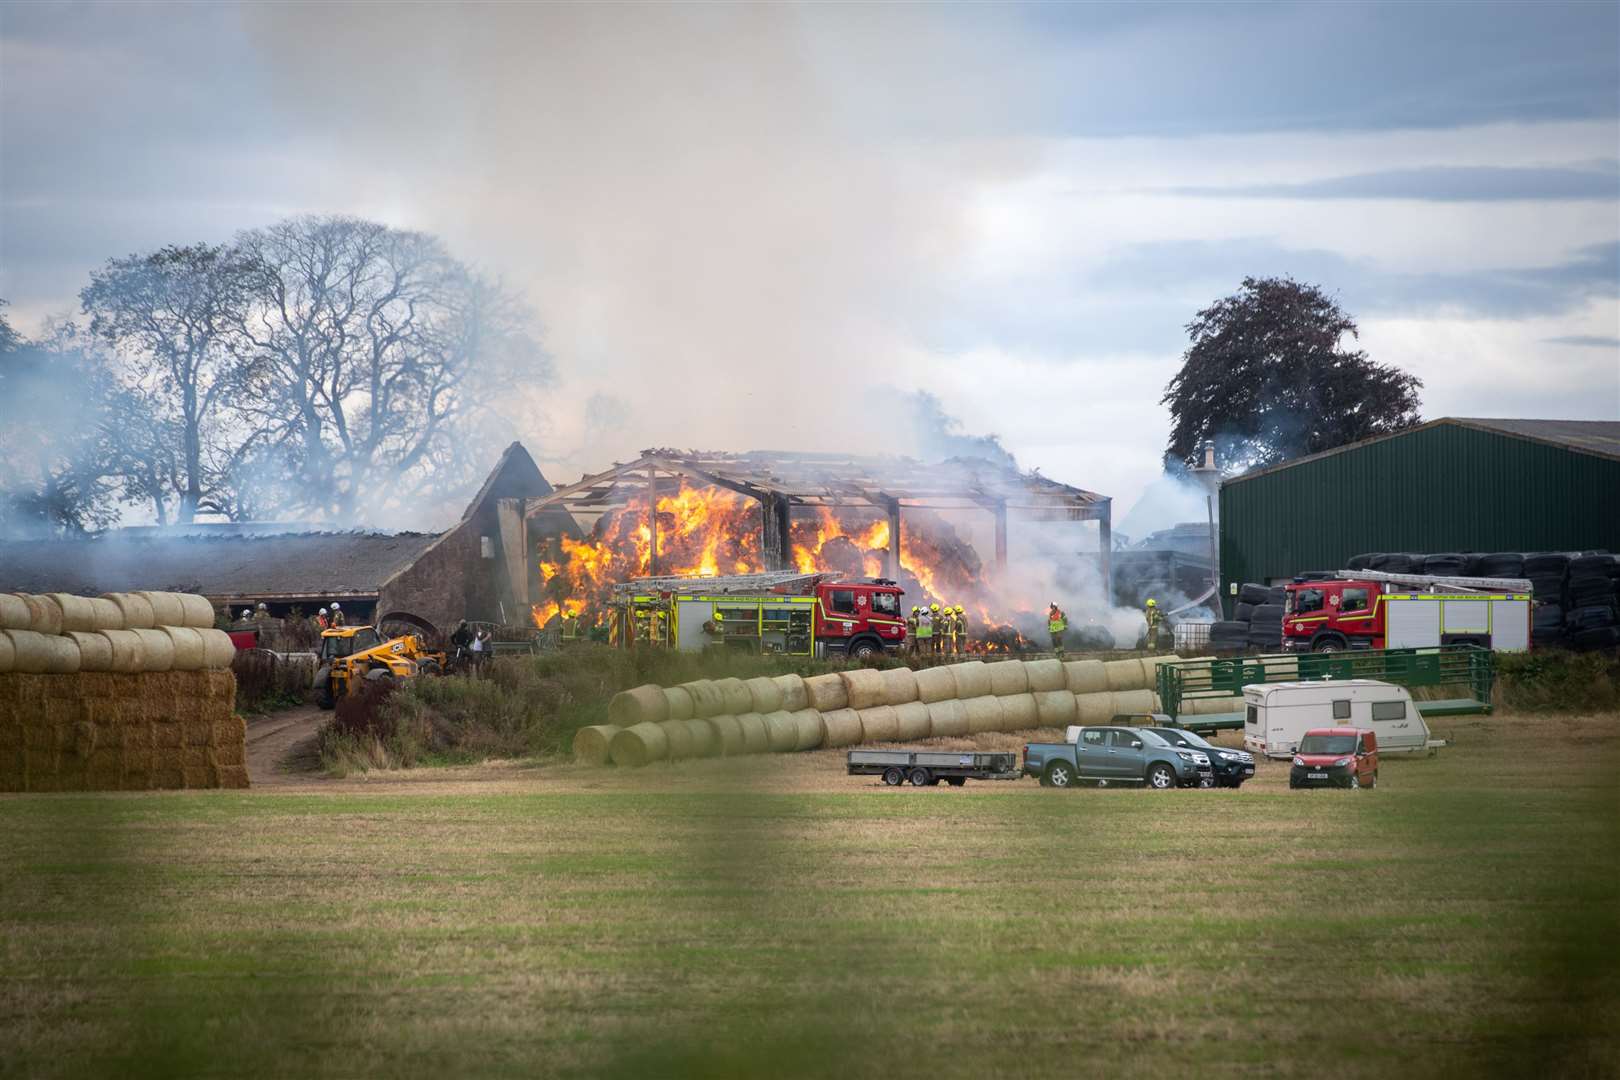 The blaze could be seen for miles around yesterday afternoon at its peak. The SFRS has confirmed there were no casualties.